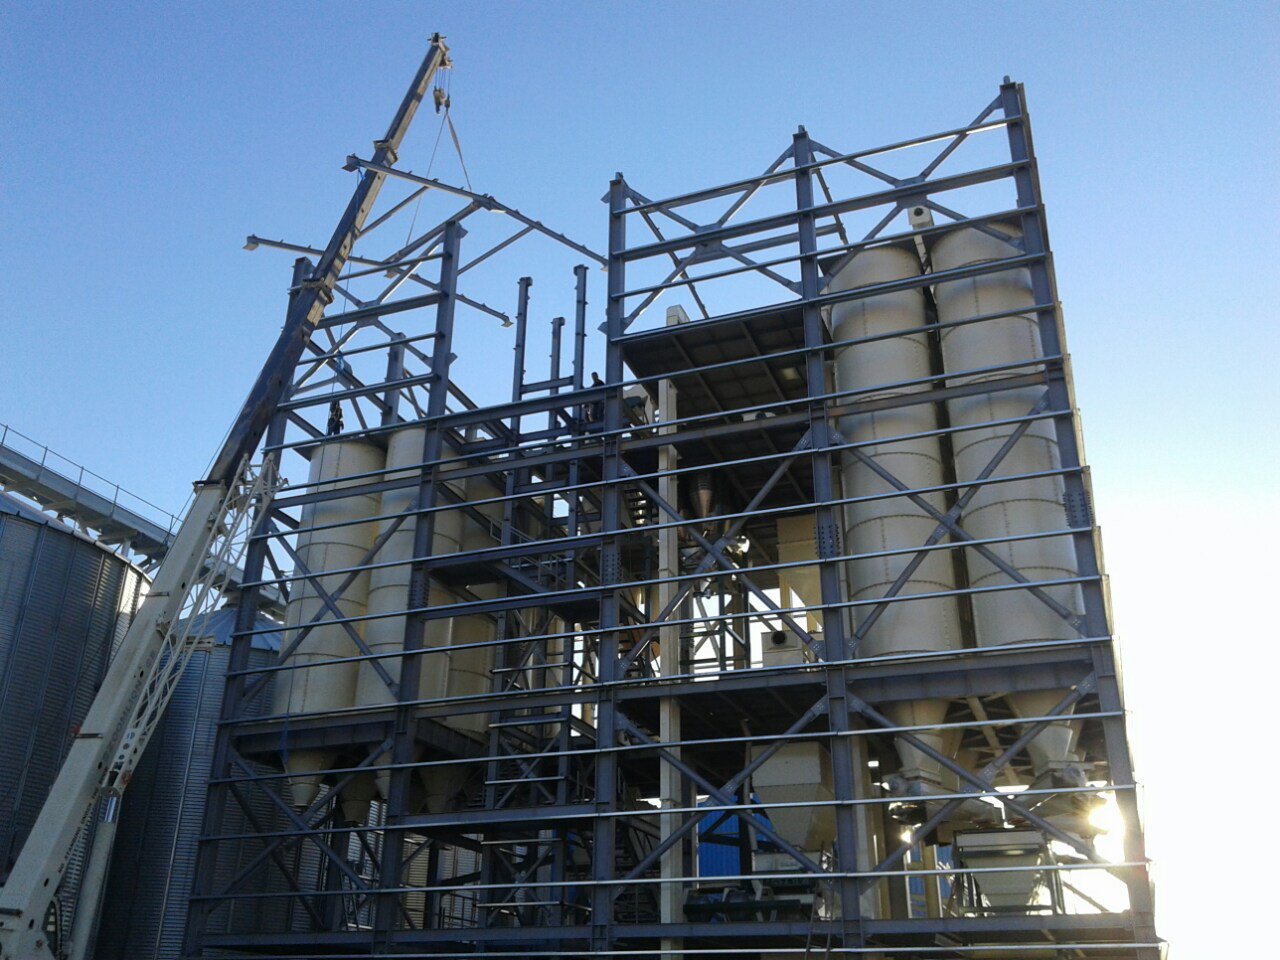 Feed Mill 10 Tons per hour+ Storage Silos 4200 Tons